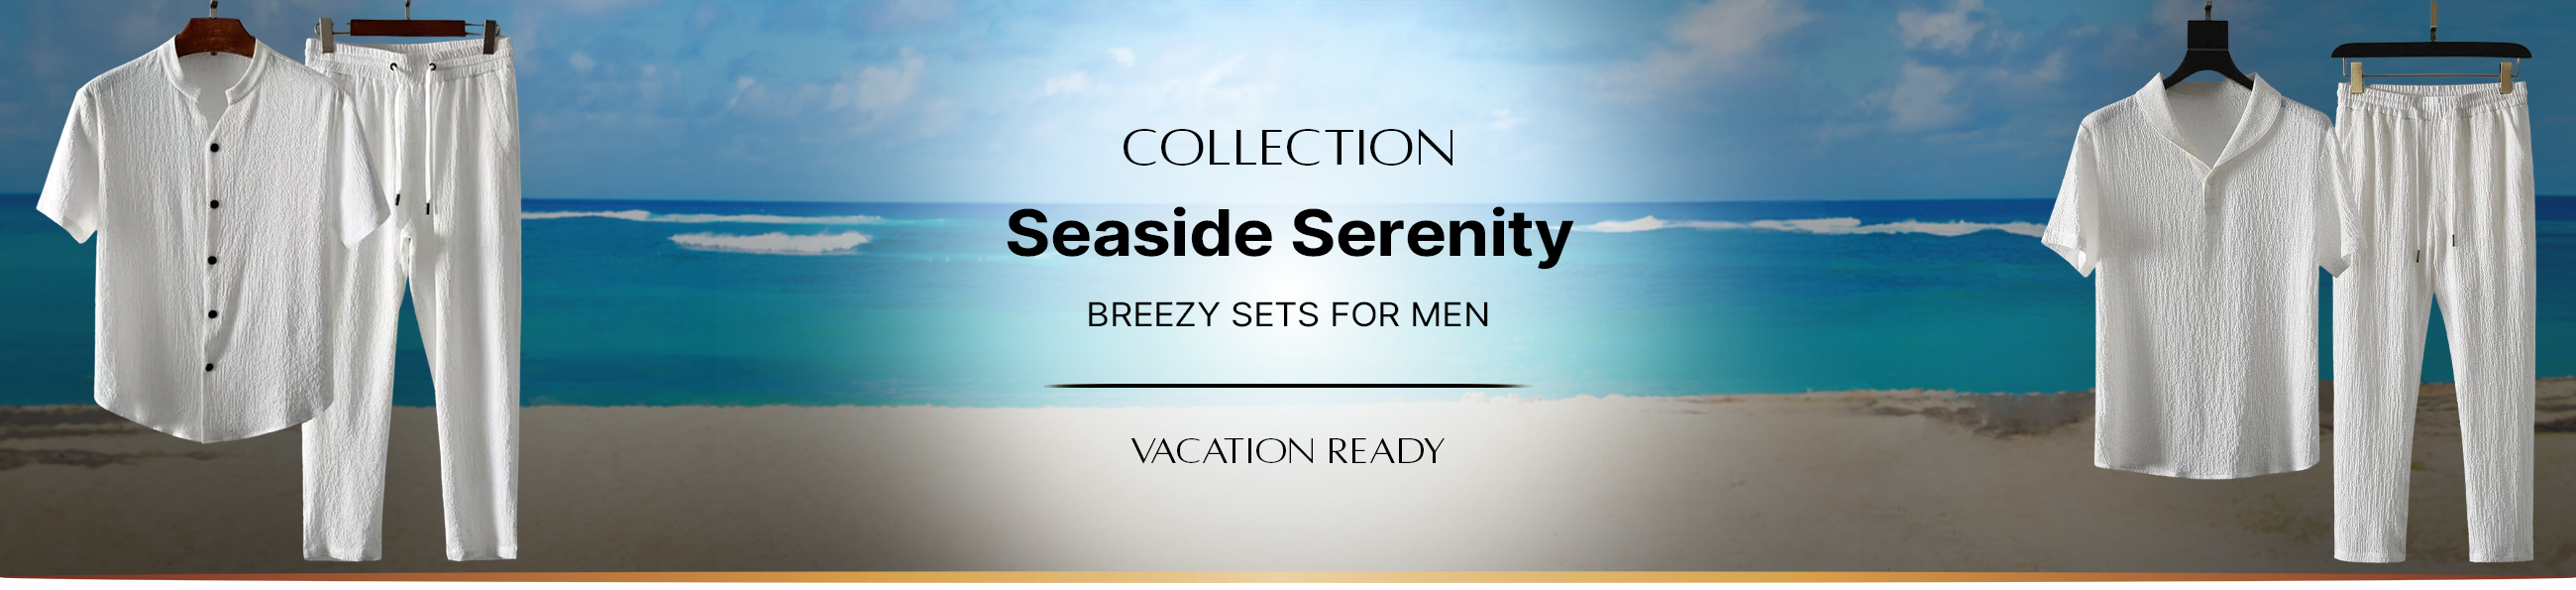 Seaside Serenity DESKTOP_BANNER.png__PID:708d3520-2763-4038-9e2c-55f4a8e4aee8